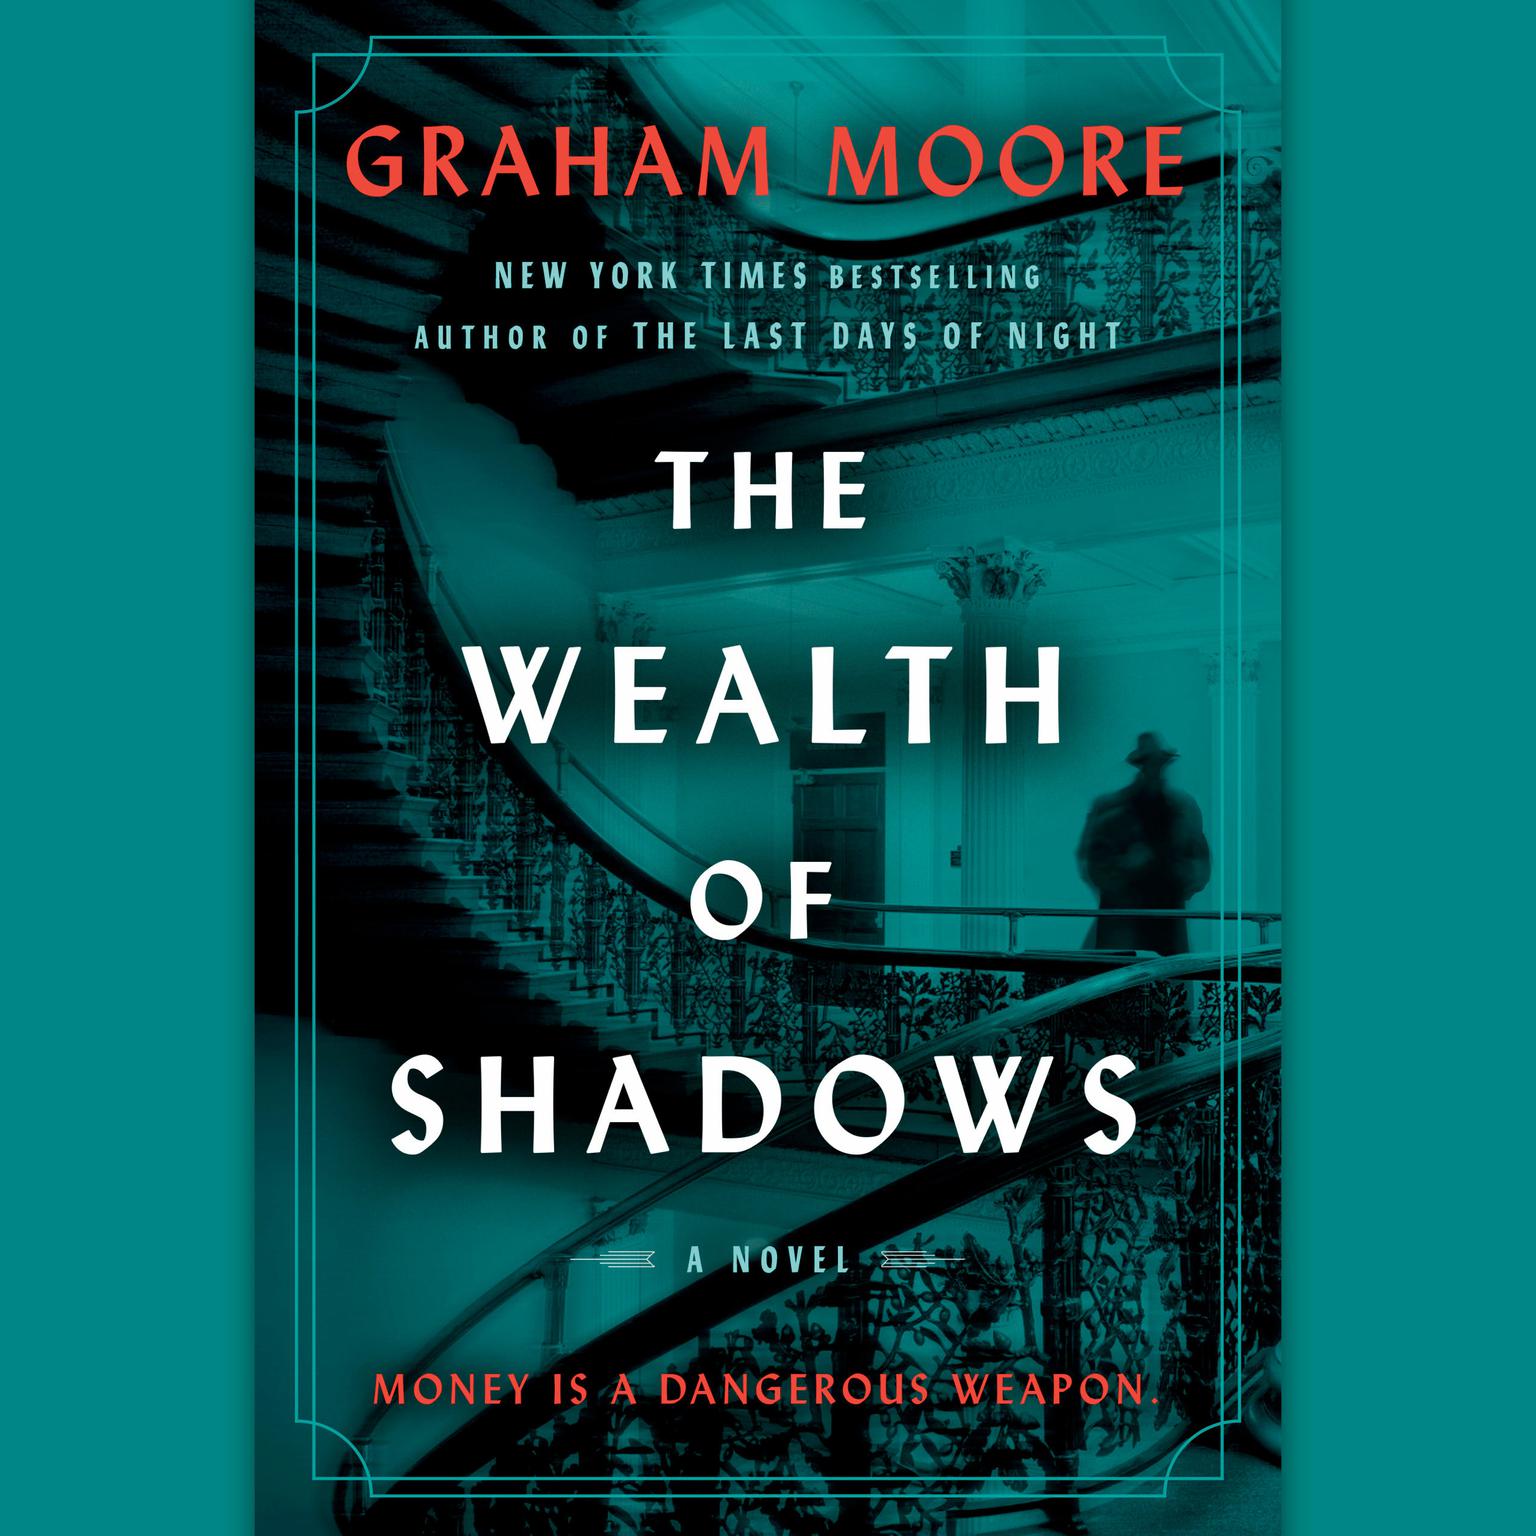 The Wealth of Shadows: A Novel Audiobook, by Graham Moore